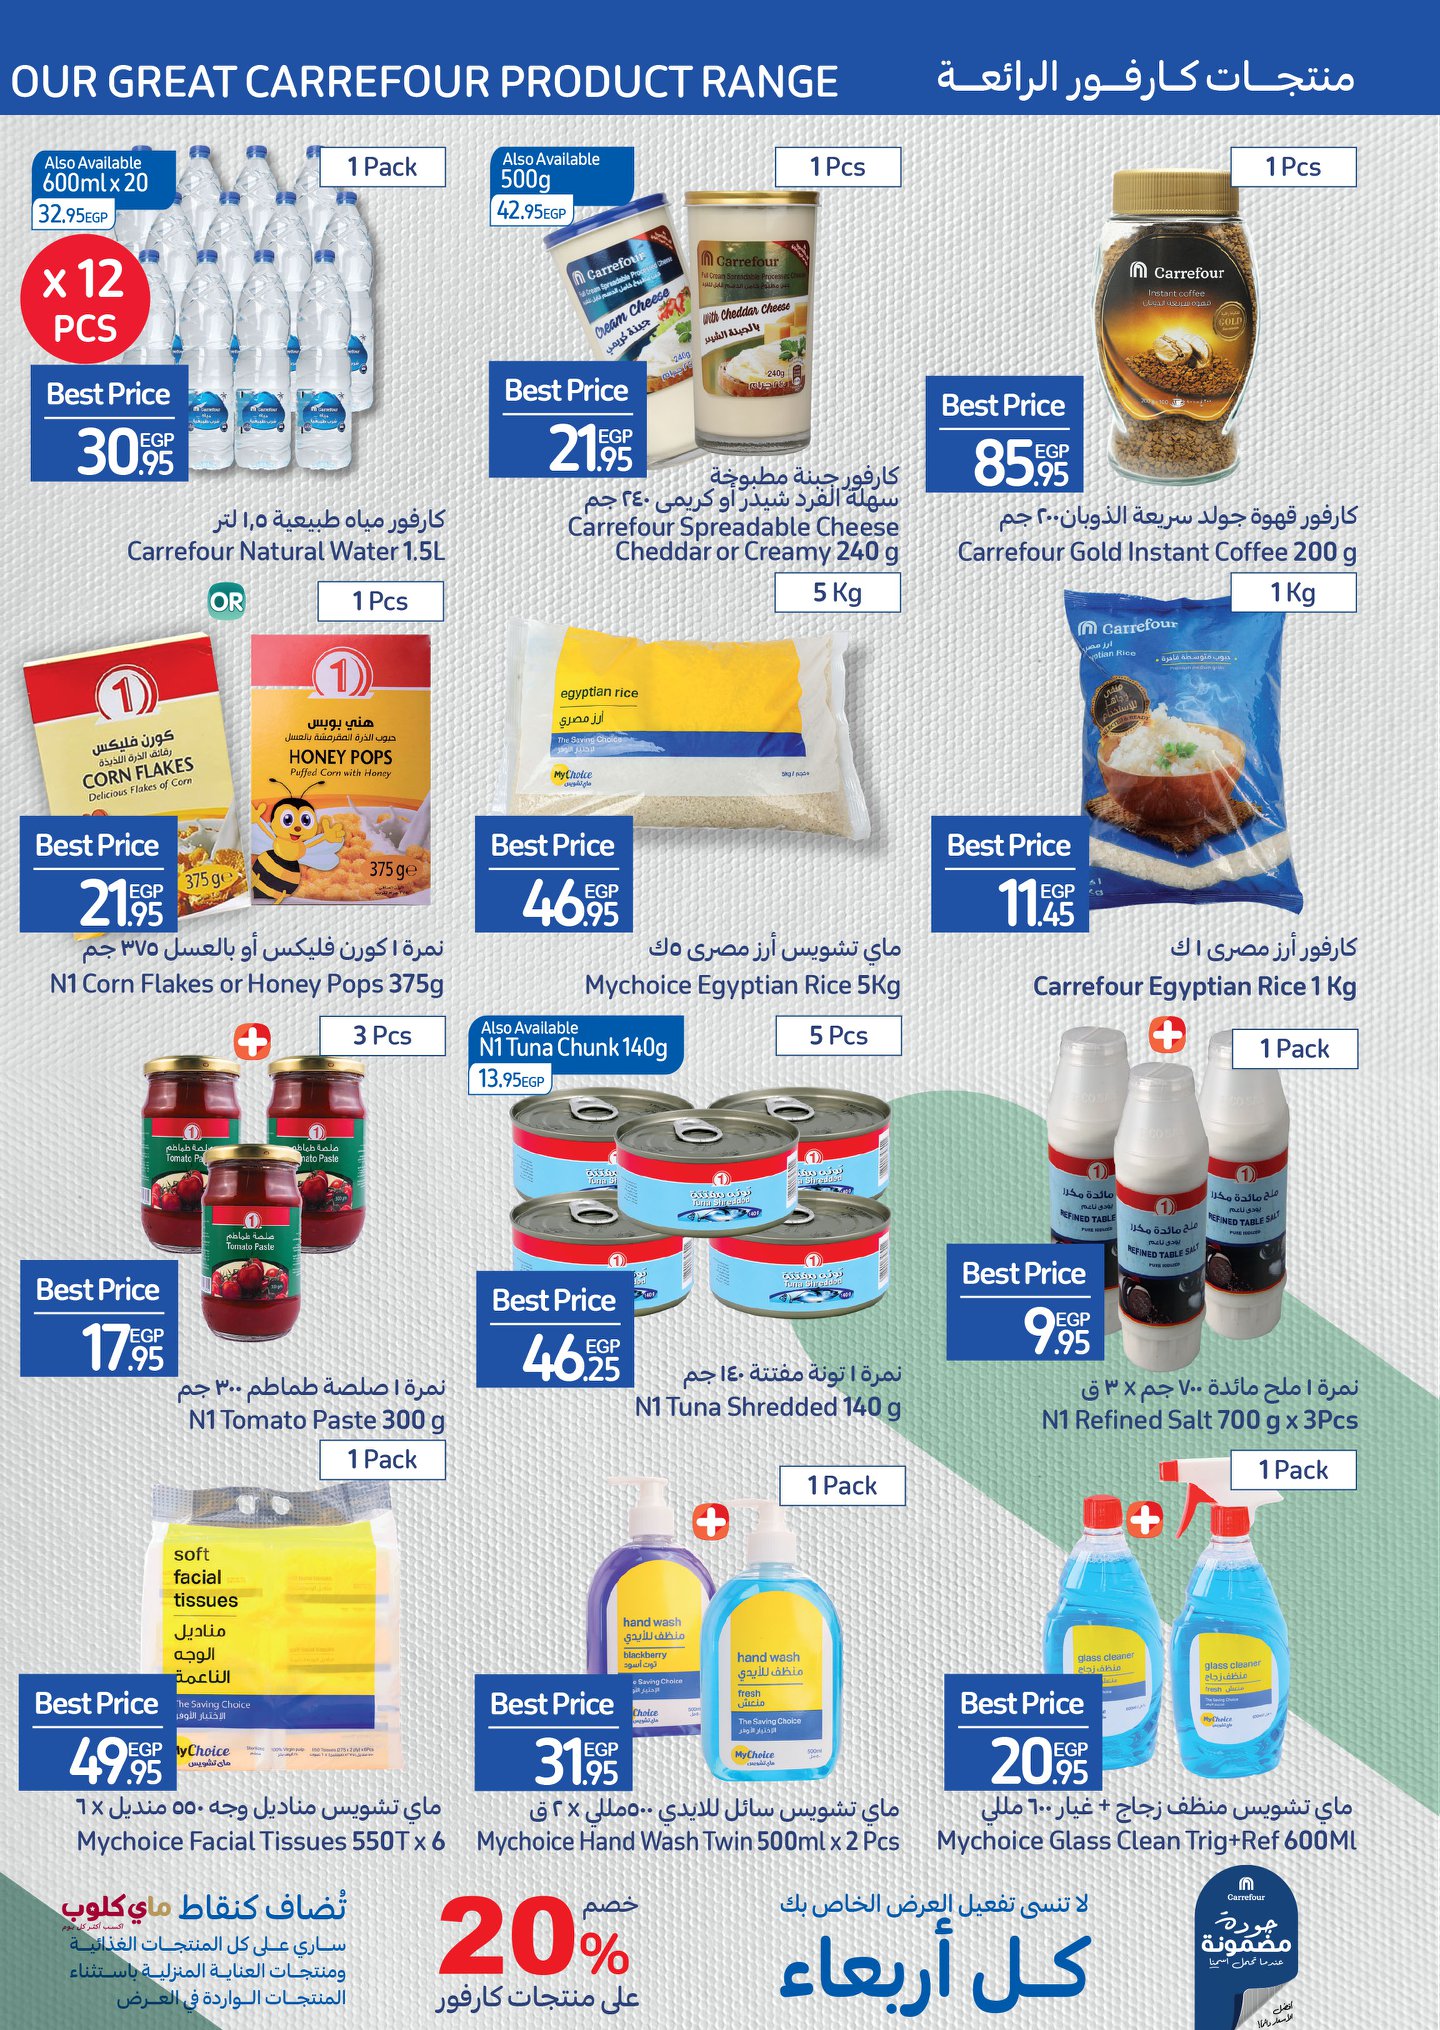 Carrefour magazine offers full 50% discounts and a surprise purchase in convenient installments without interest 40